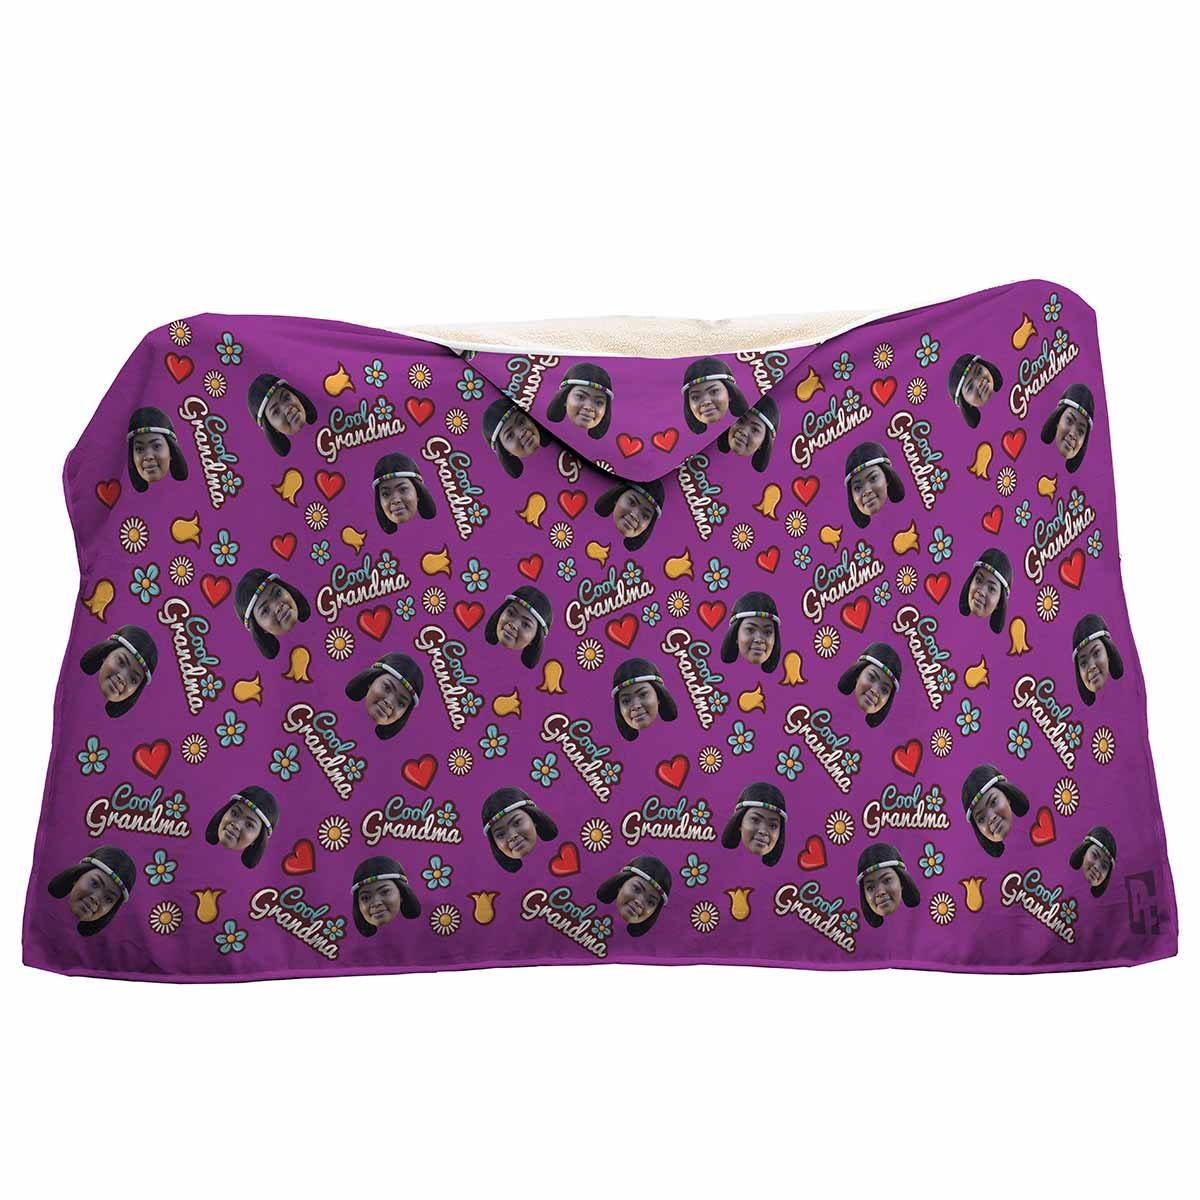 purple Cool Grandmother hooded blanket personalized with photo of face printed on it